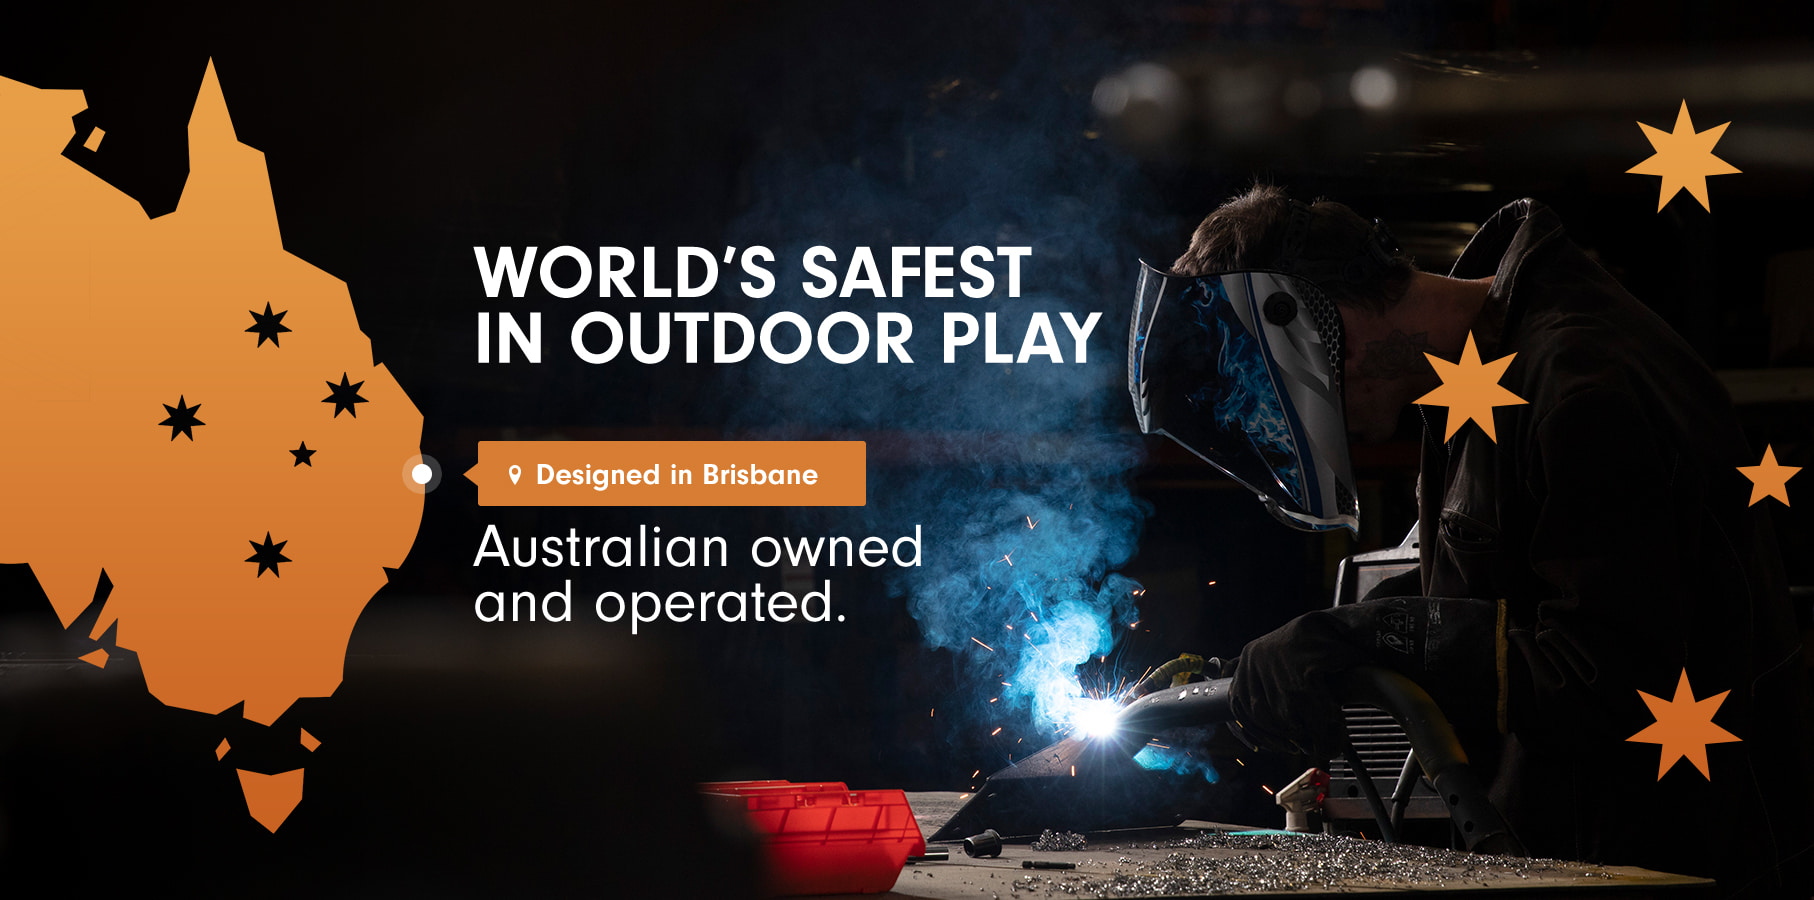 World's safest in outdoor play